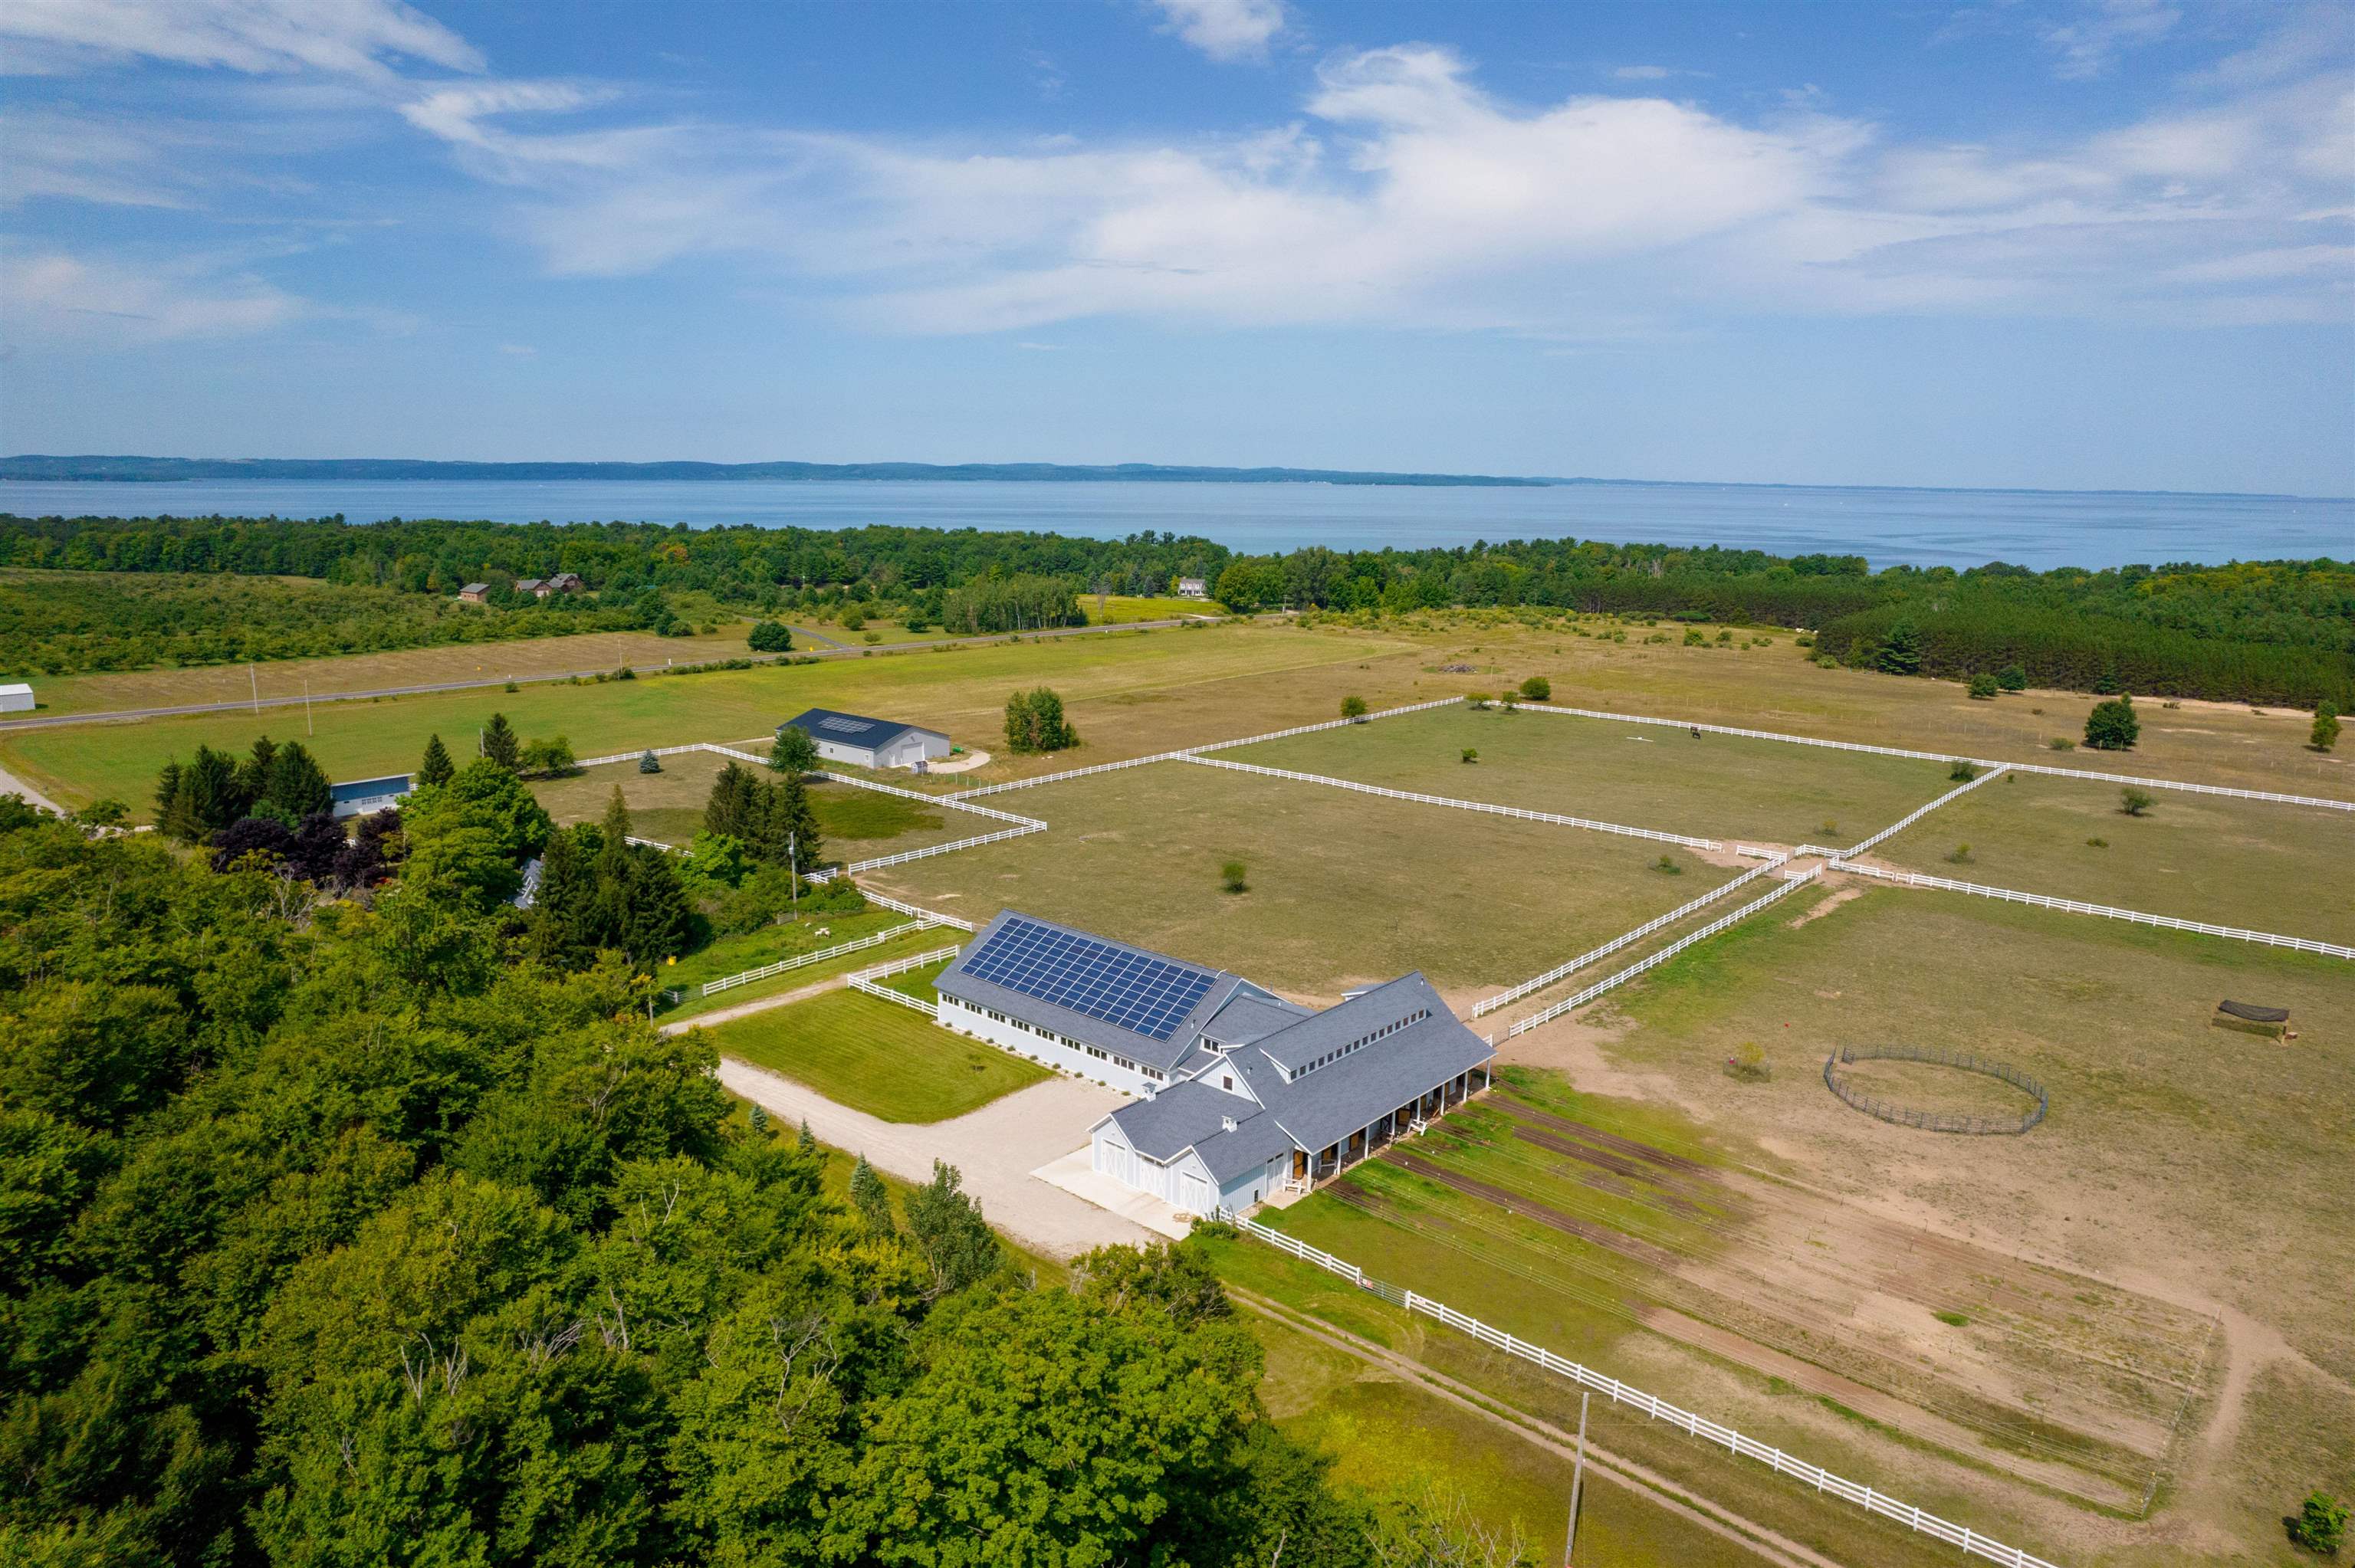 Here is your chance to own a fully working farm on the coveted Old Mission Peninsula in Traverse City, Michigan! Sprawling over 126 acres and consisting of 5 parcels, this property has a rare 300' of private sandy water frontage on West Grand Traverse Bay, an operating equestrian facility, a turn of the century farm house, and multiple outbuildings. Complete with livestock including 4 Rocky Mountain horses and 7 purebred Great Pyrenees guard dogs. The land has 2000+ Christmas trees, 300+ lavender Vera plants, and 15 acres already in rotational crop. The equestrian barn, built in 2016, features 9 stalls, garage doors for work vehicles, saddle room, employee break room and laundry, grooming areas, and an expansive 60x100 heated dirt arena for working the horses. Walking upstairs, you will find a large office space with picture windows overlooking the stalls and a viewing balcony for the training arena. There are multiple outbuildings on the property including a newly built (2020) pole barn currently used for hay and tractor storage. Equipment, tack, and feed included with property - perfect for an experienced/aspiring farmer or equestrian enthusiast. Surrounded by beautiful Traverse City countryside with only a short walk to your own private sandy beach on the bay, this is an opportunity you do not want to miss!